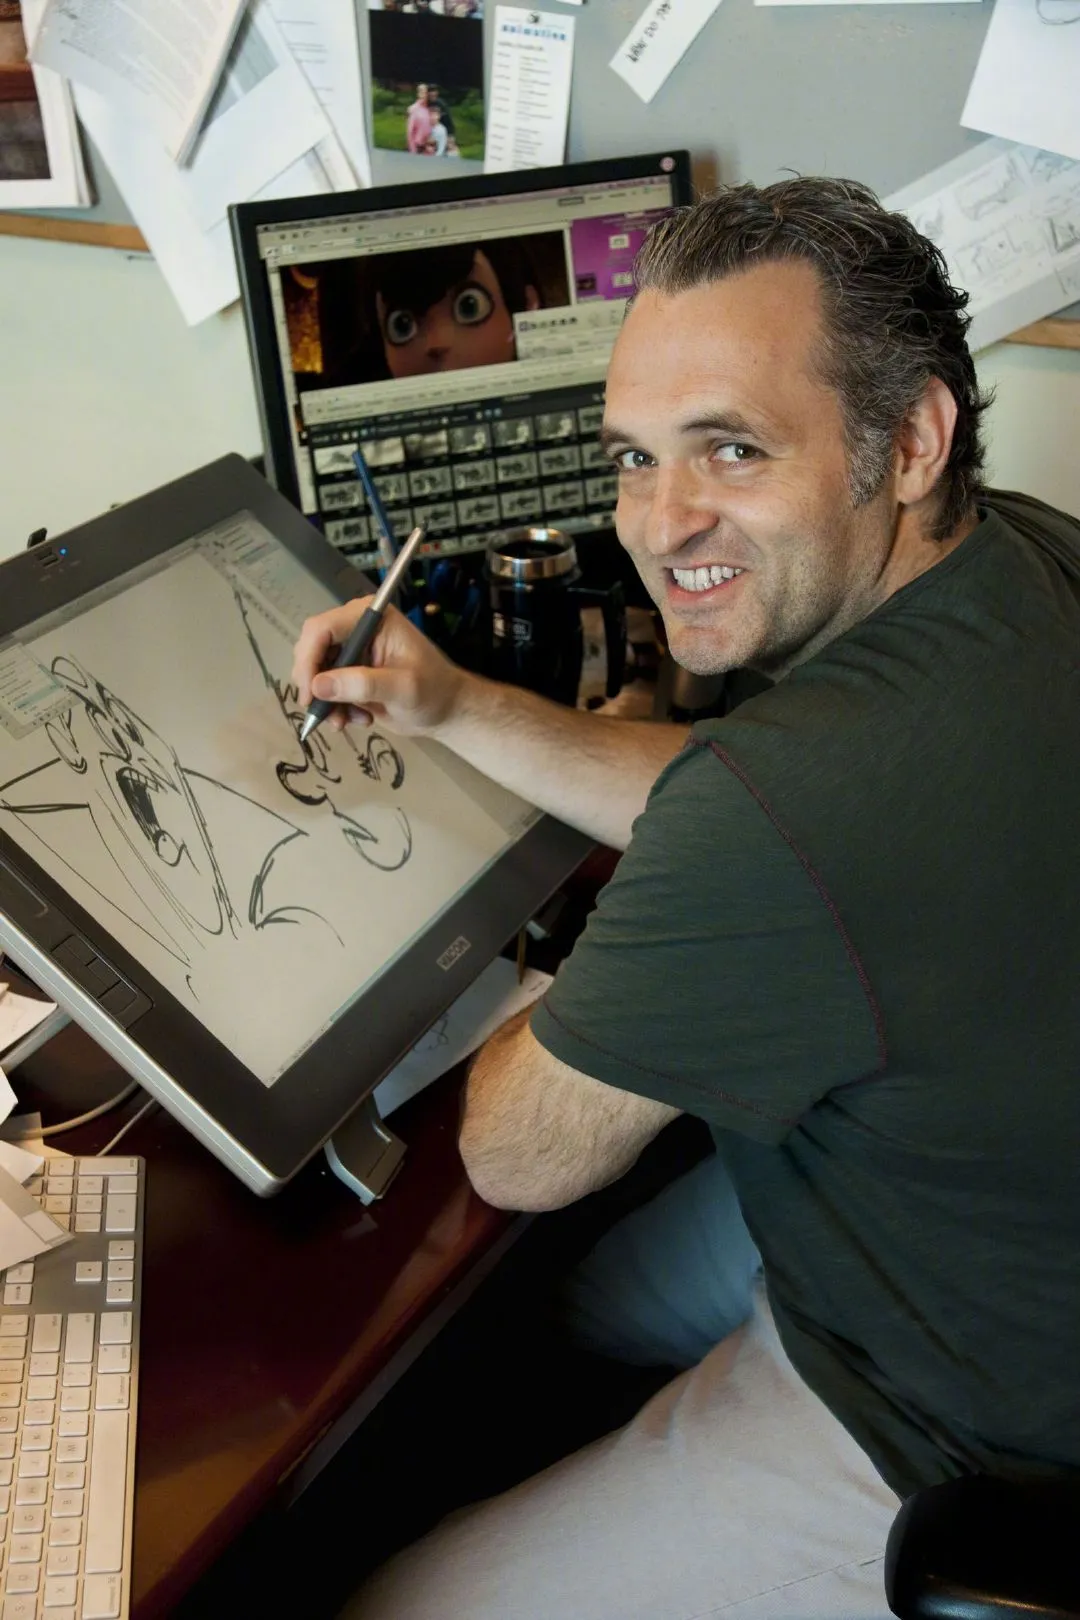 'Hotel Transylvania' director Genndy Tartakovsky recently revealed that his new film is an R-rated 2D animated film titled 'Fixed' | FMV6